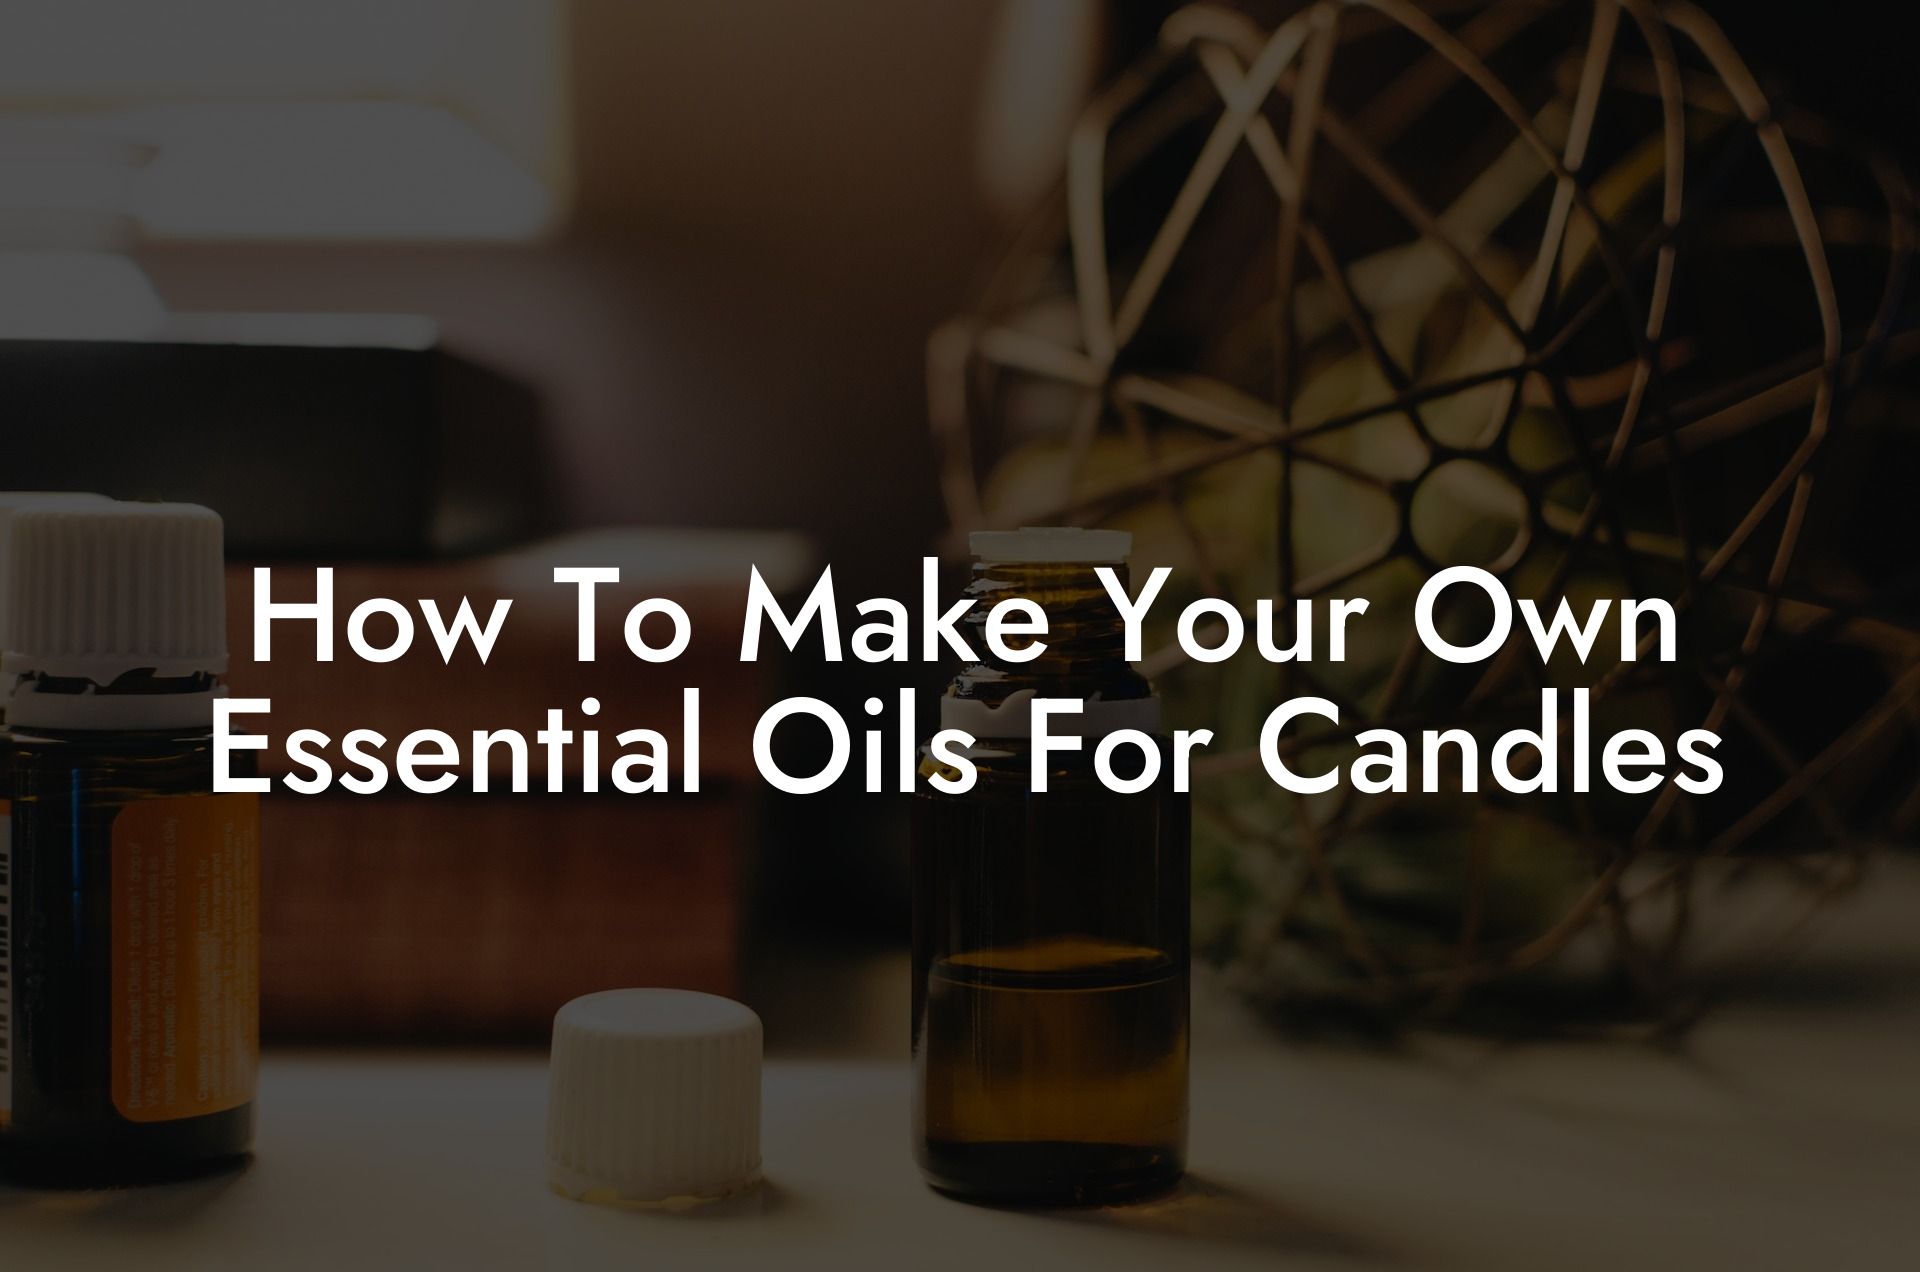 How To Make Your Own Essential Oils For Candles